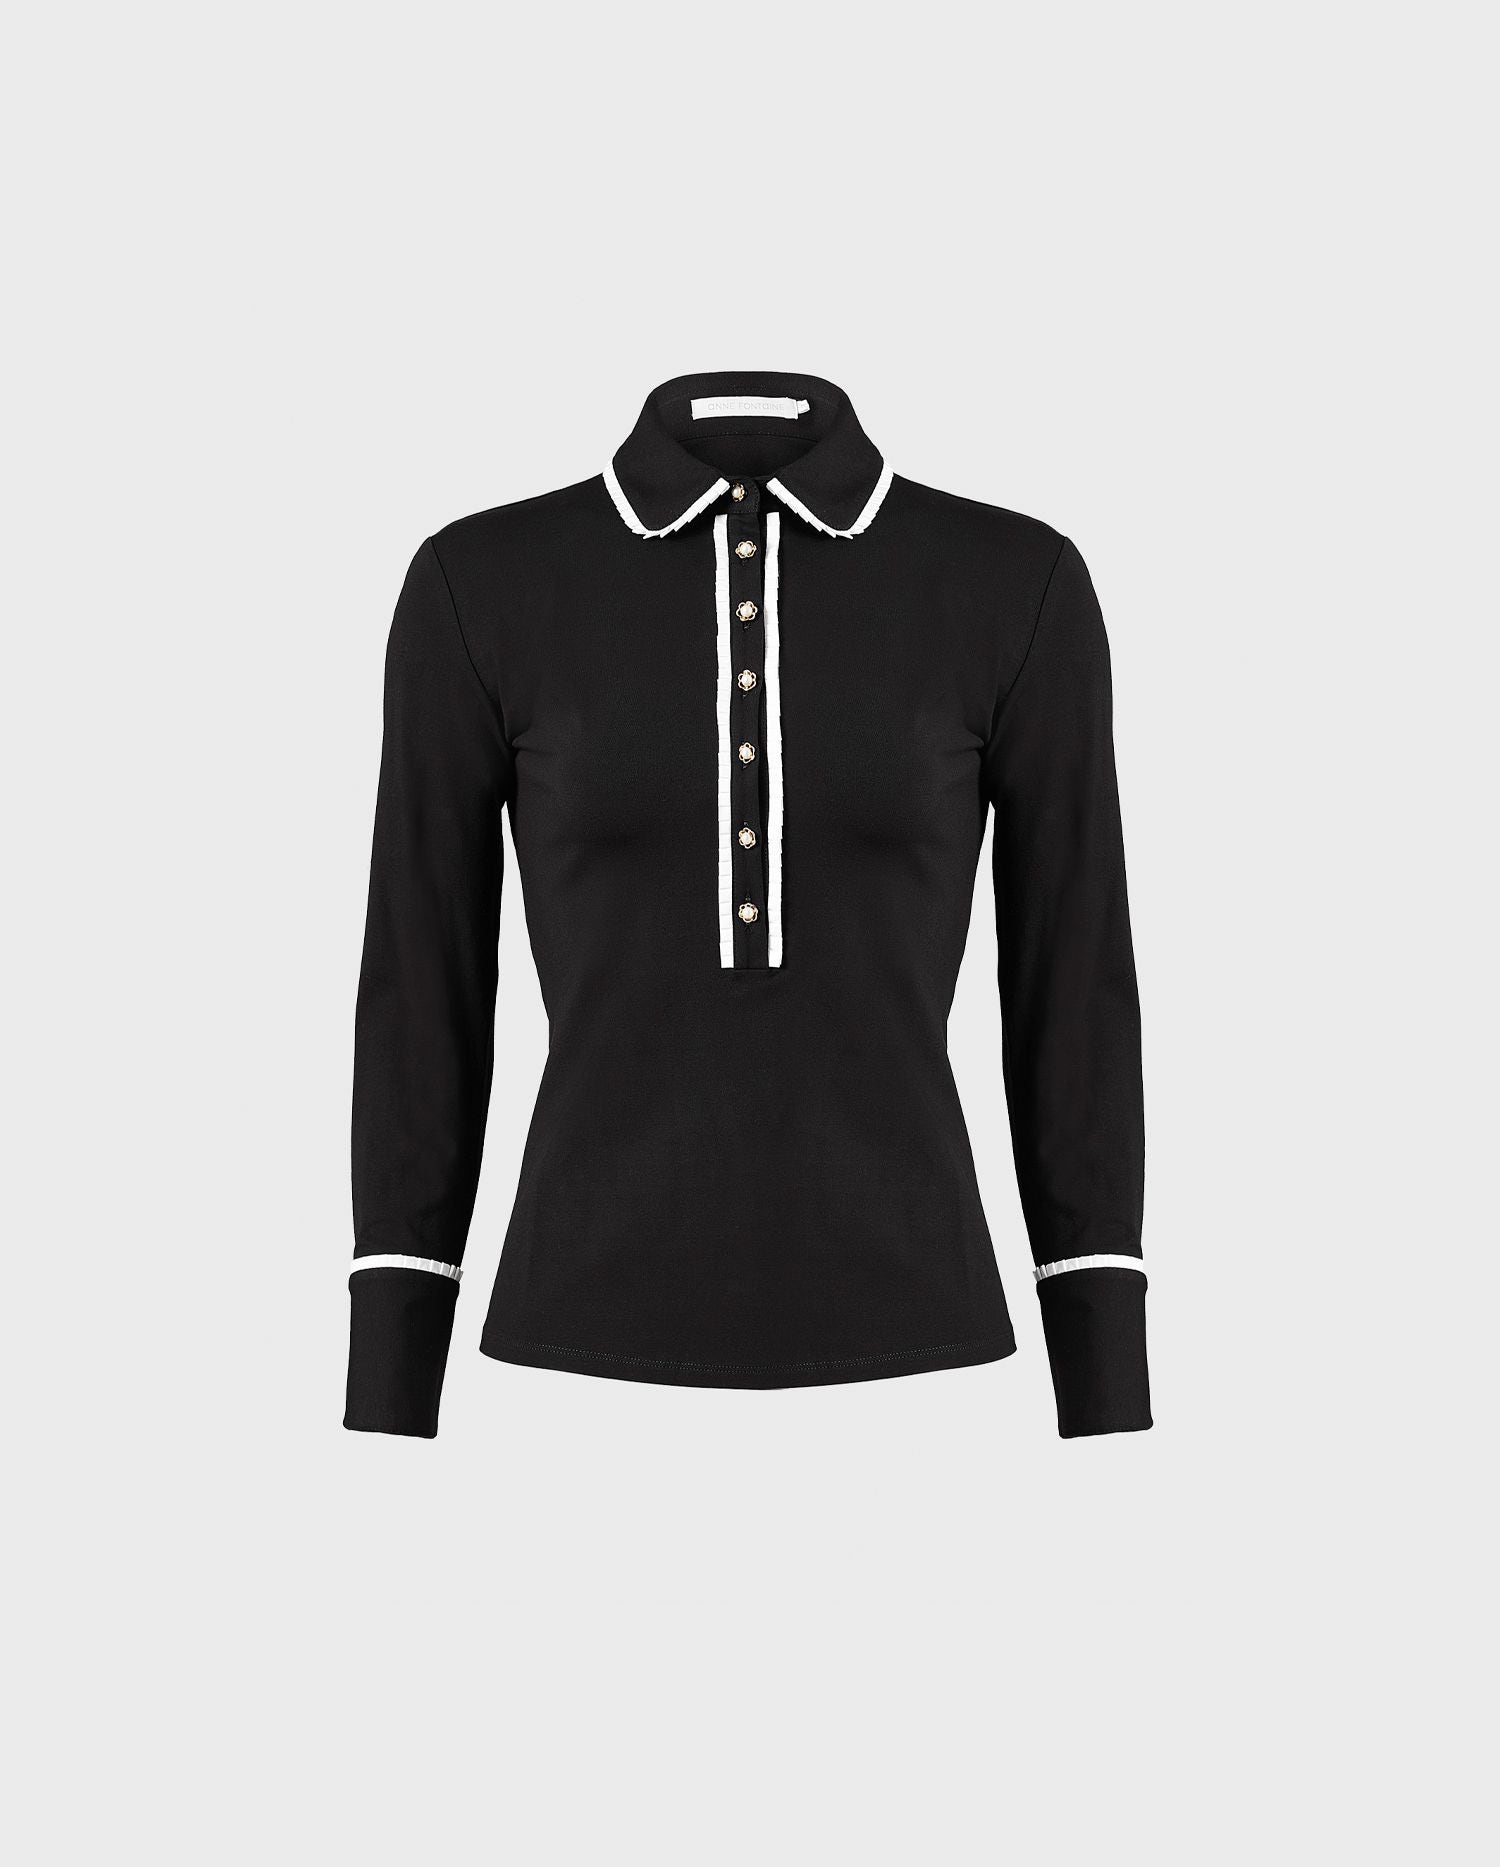 The Faustine black cotton polin shirt is the perfect staple to add to your Fall wardrobe